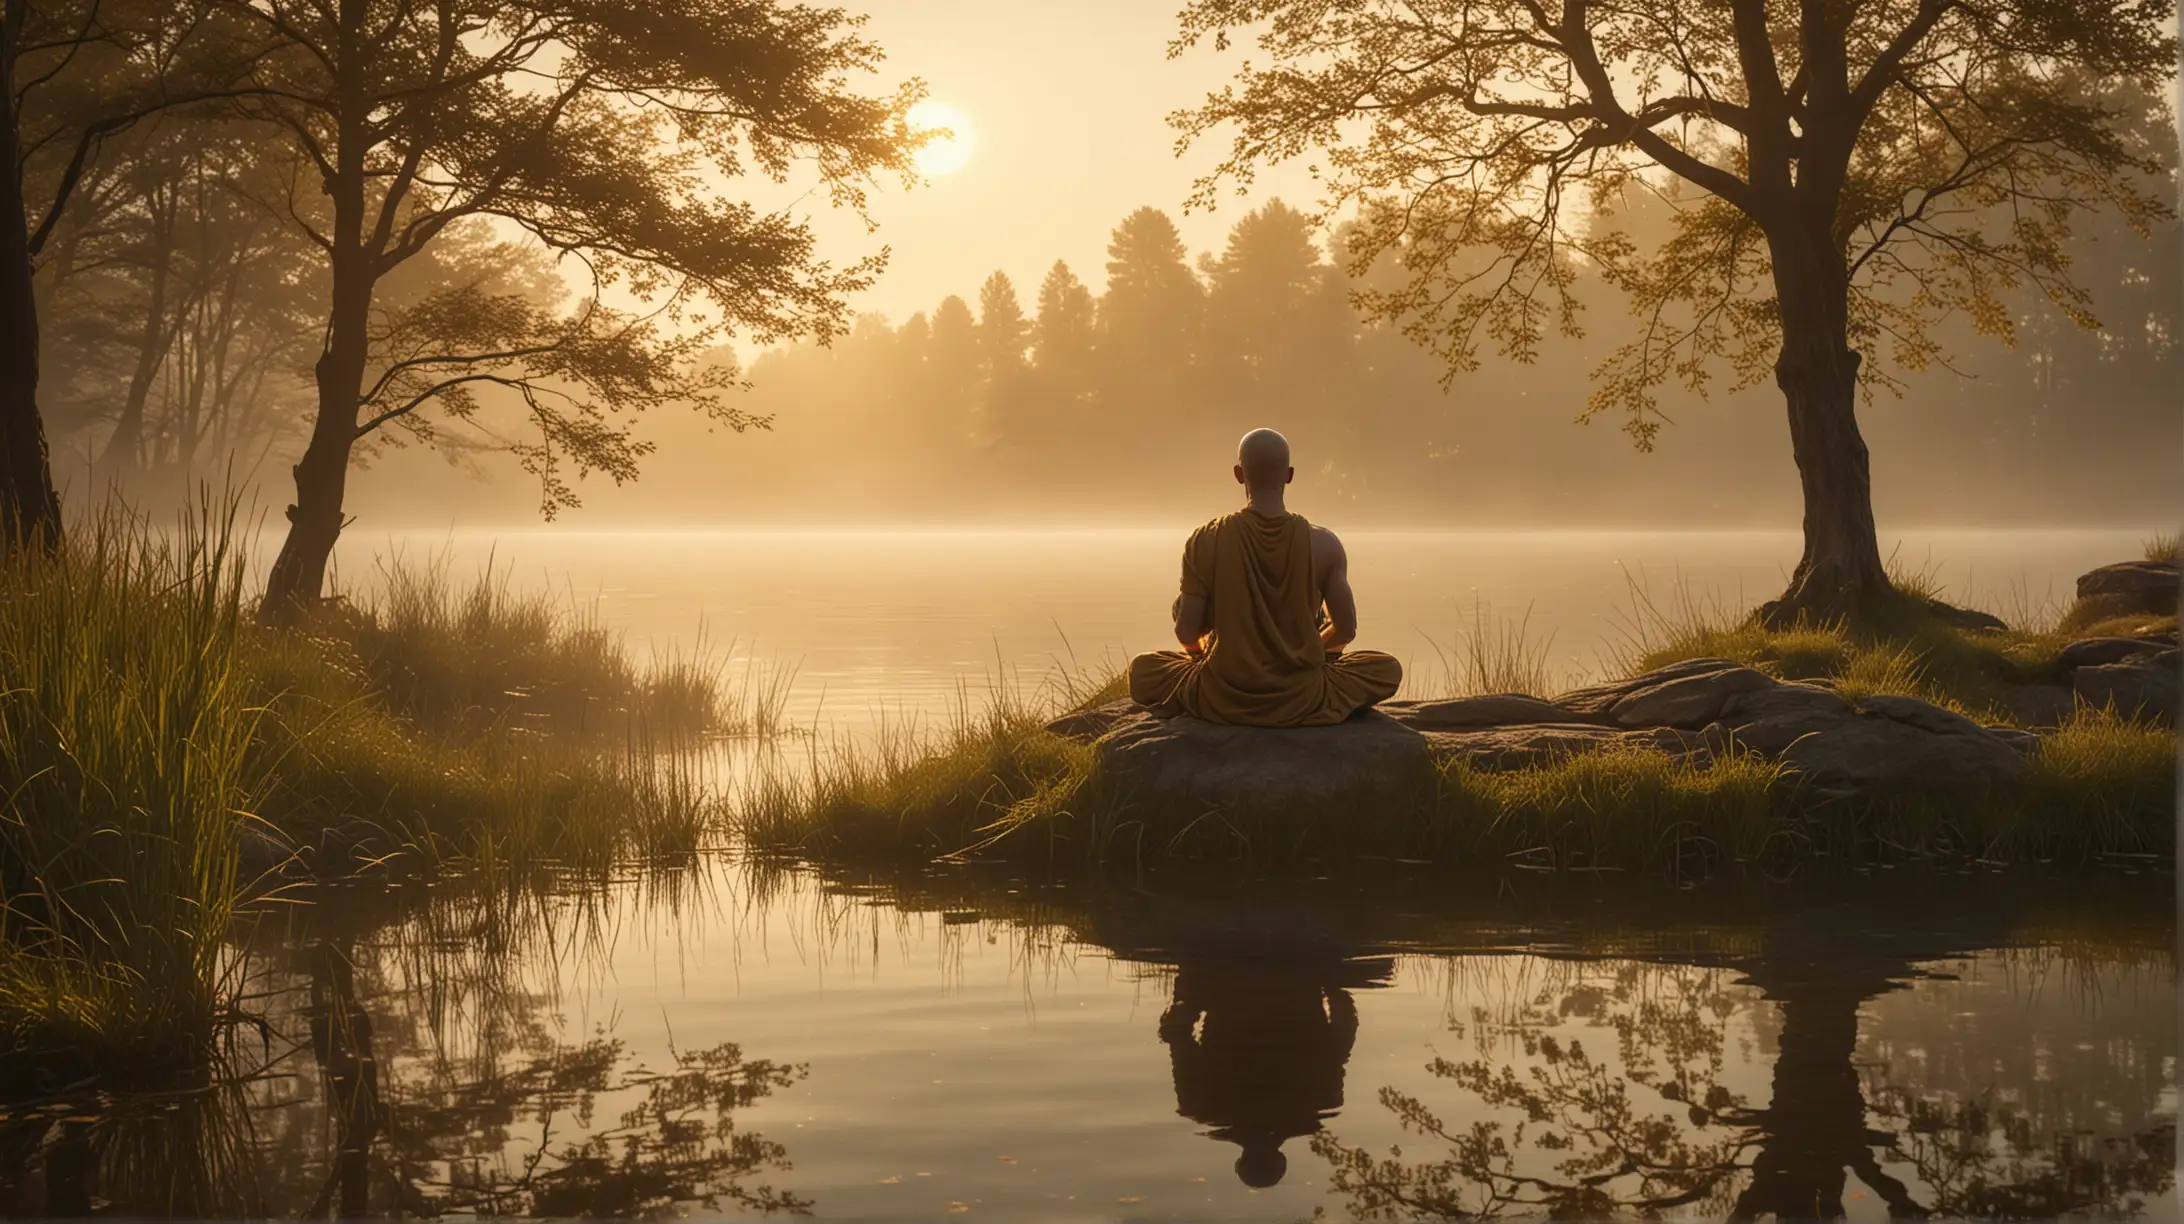 General Visualization: Visualize a stoic philosopher practicing meditation by a calm lakeside at dawn, symbolizing inner peace and self-reflection.
Image Description: The image depicts a lean, muscular stoic philosopher seated cross-legged on a grassy bank by a serene lake. The early morning sun casts a golden hue over the scene, highlighting the tranquil water and misty surroundings. The philosopher's eyes are closed in deep meditation, embodying the principles of mindfulness and introspection.